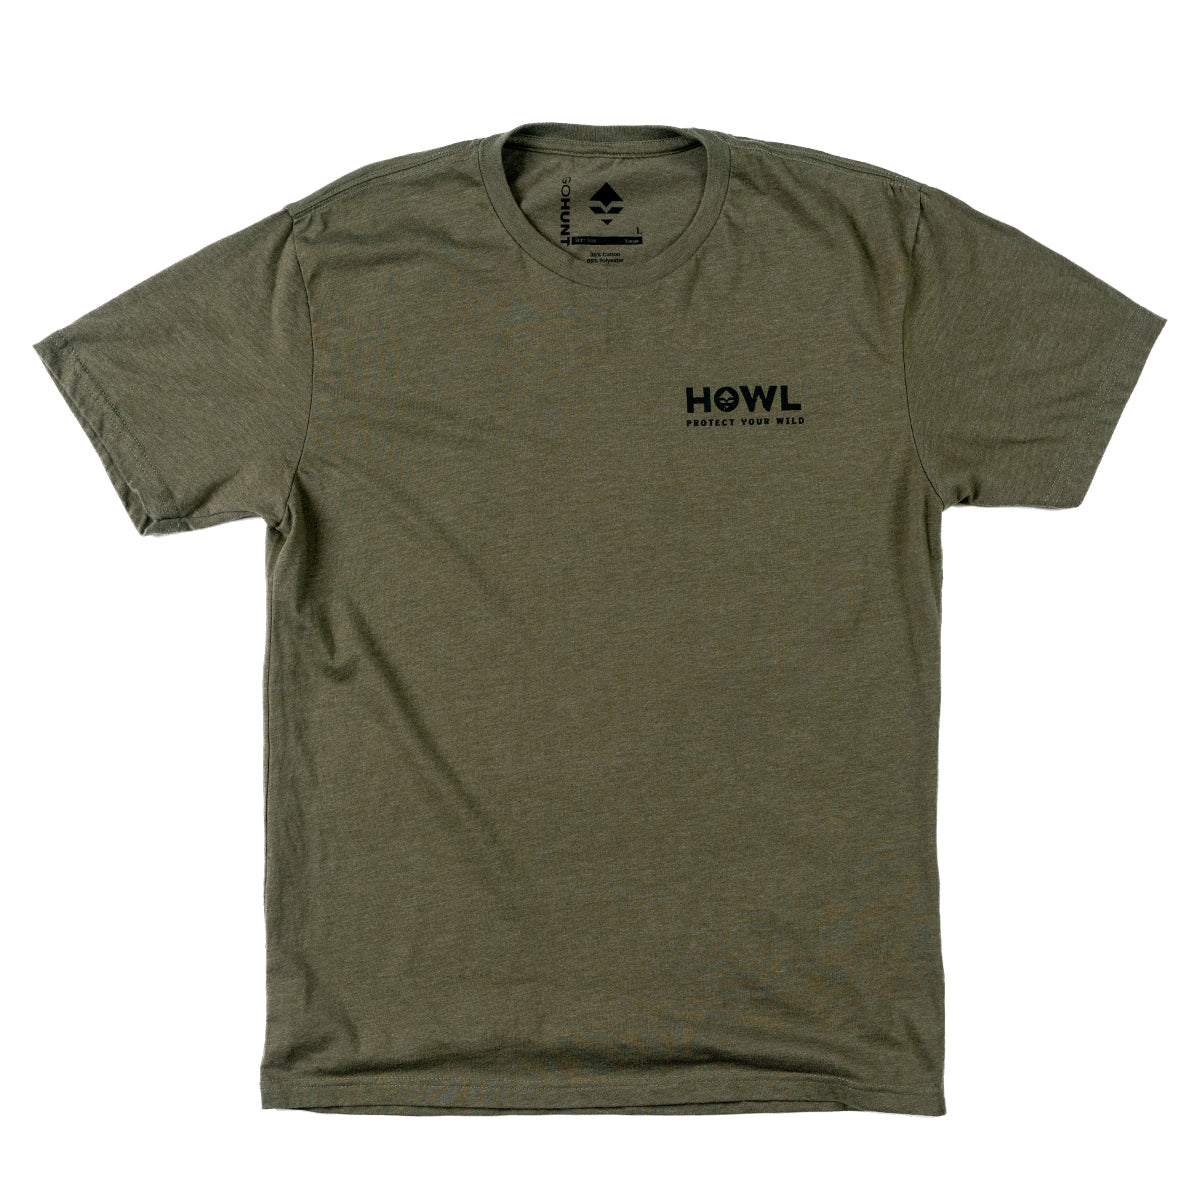 GOHUNT × Howl For Wildlife T-Shirt in  by GOHUNT | GOHUNT - GOHUNT Shop